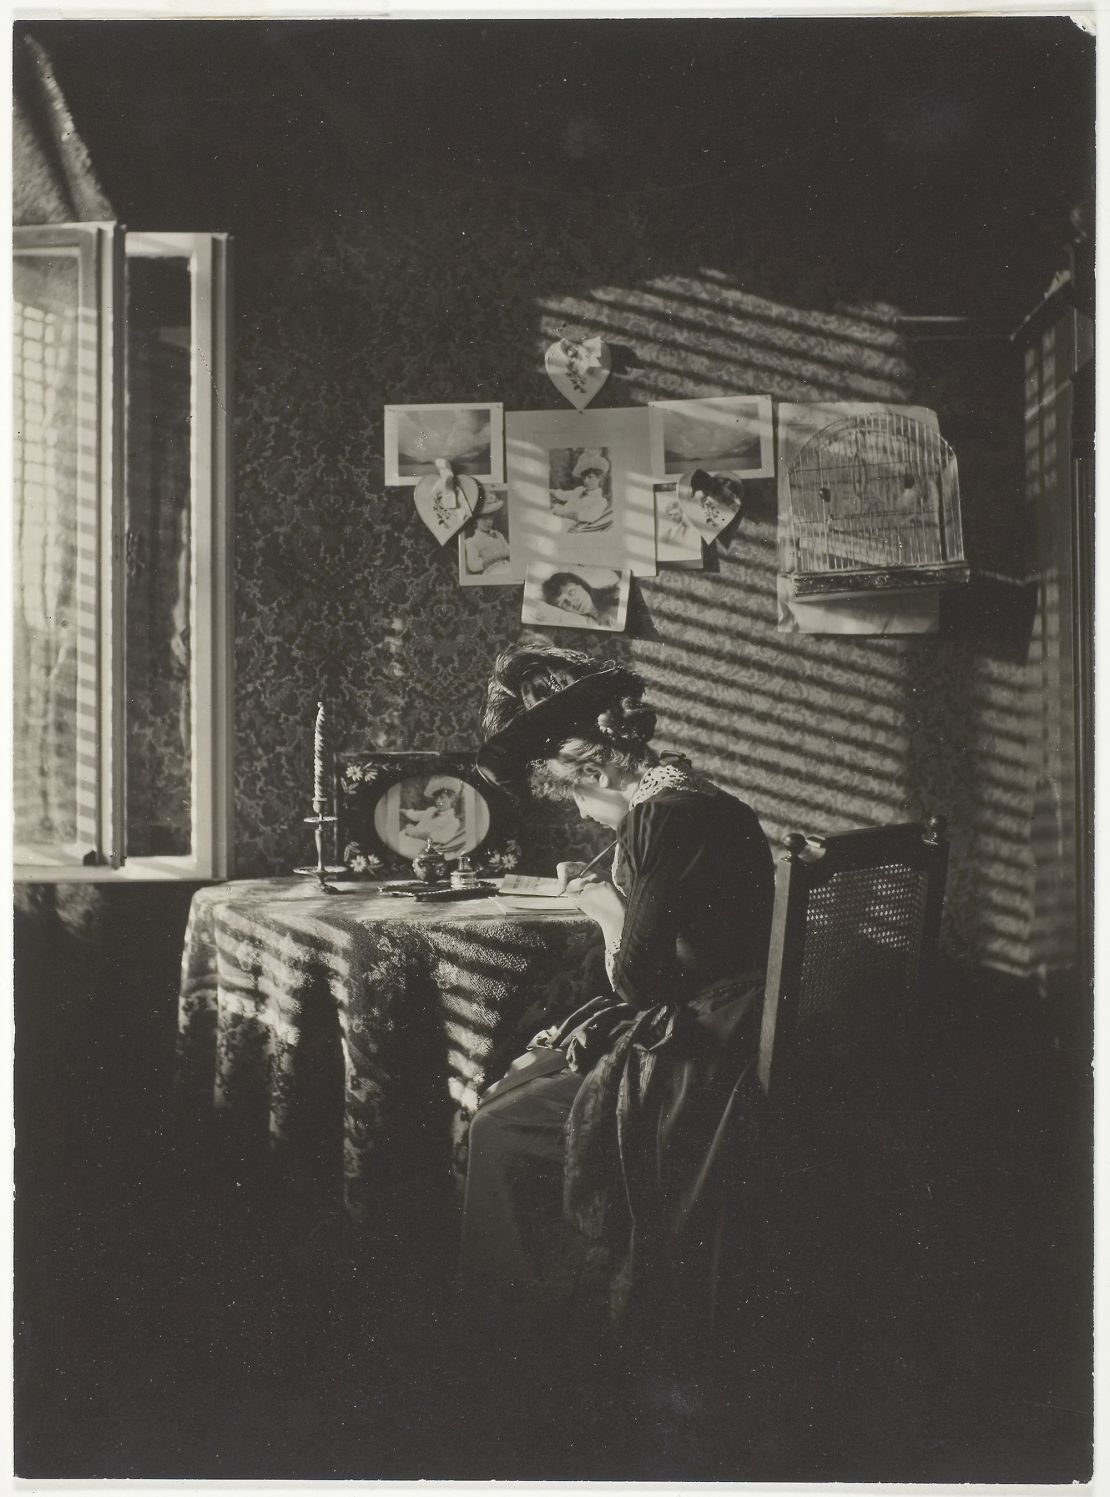 "Sun Rays–Paula, Berlin," a photograph taken by Alfred Stieglitz in the 19th century and first exhibited in the early 20th century.